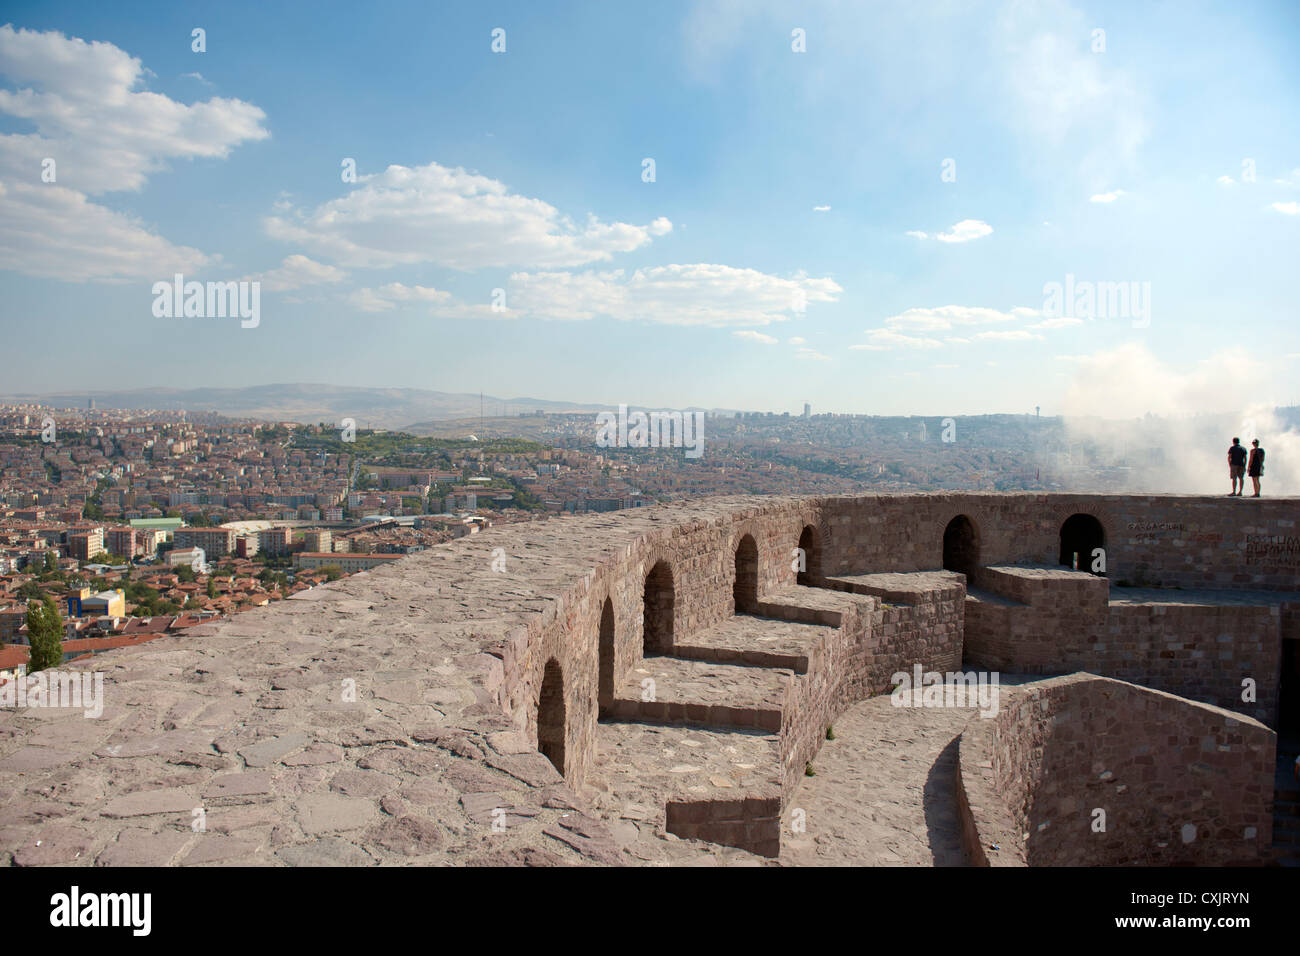 Two men on the upper remparts of the citadel crowning the city skyline of Ankara, capital of Turkey Stock Photo